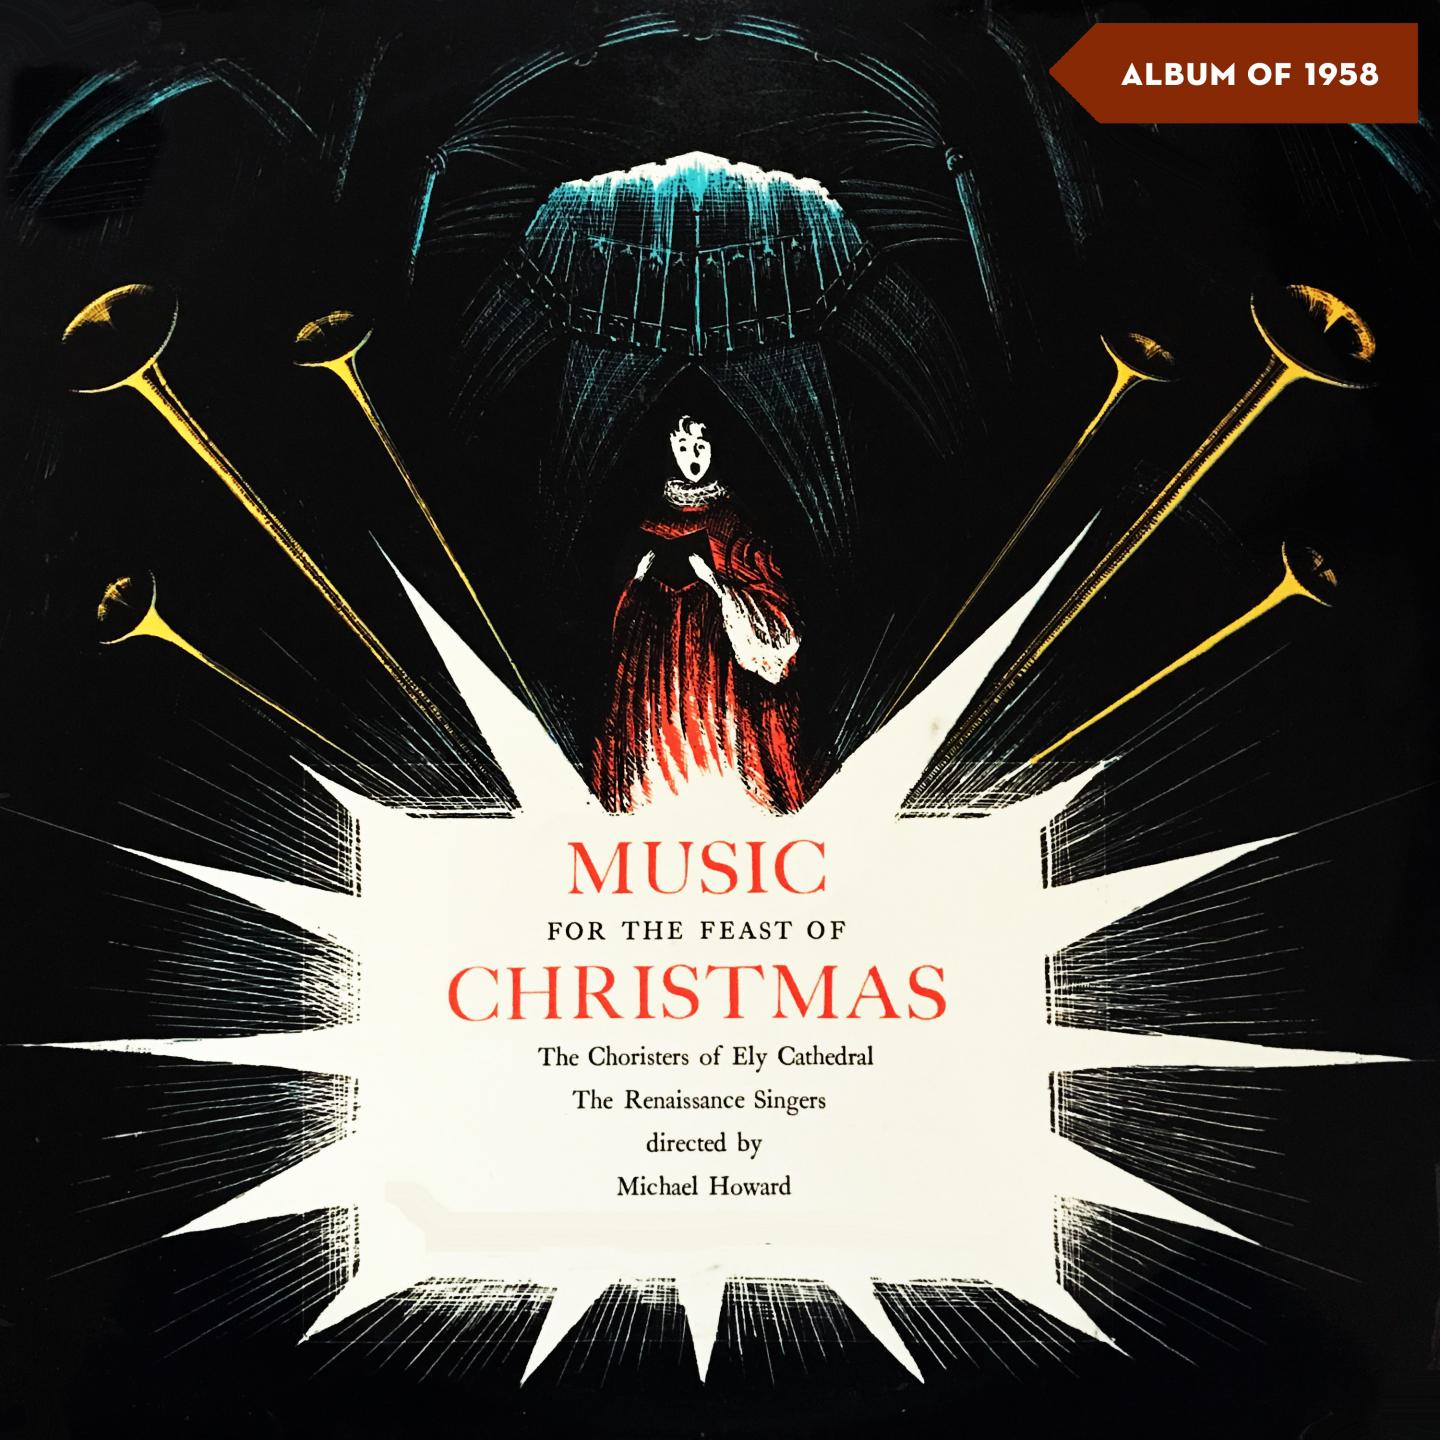 Music for the Feast of Christmas (Album of 1958)